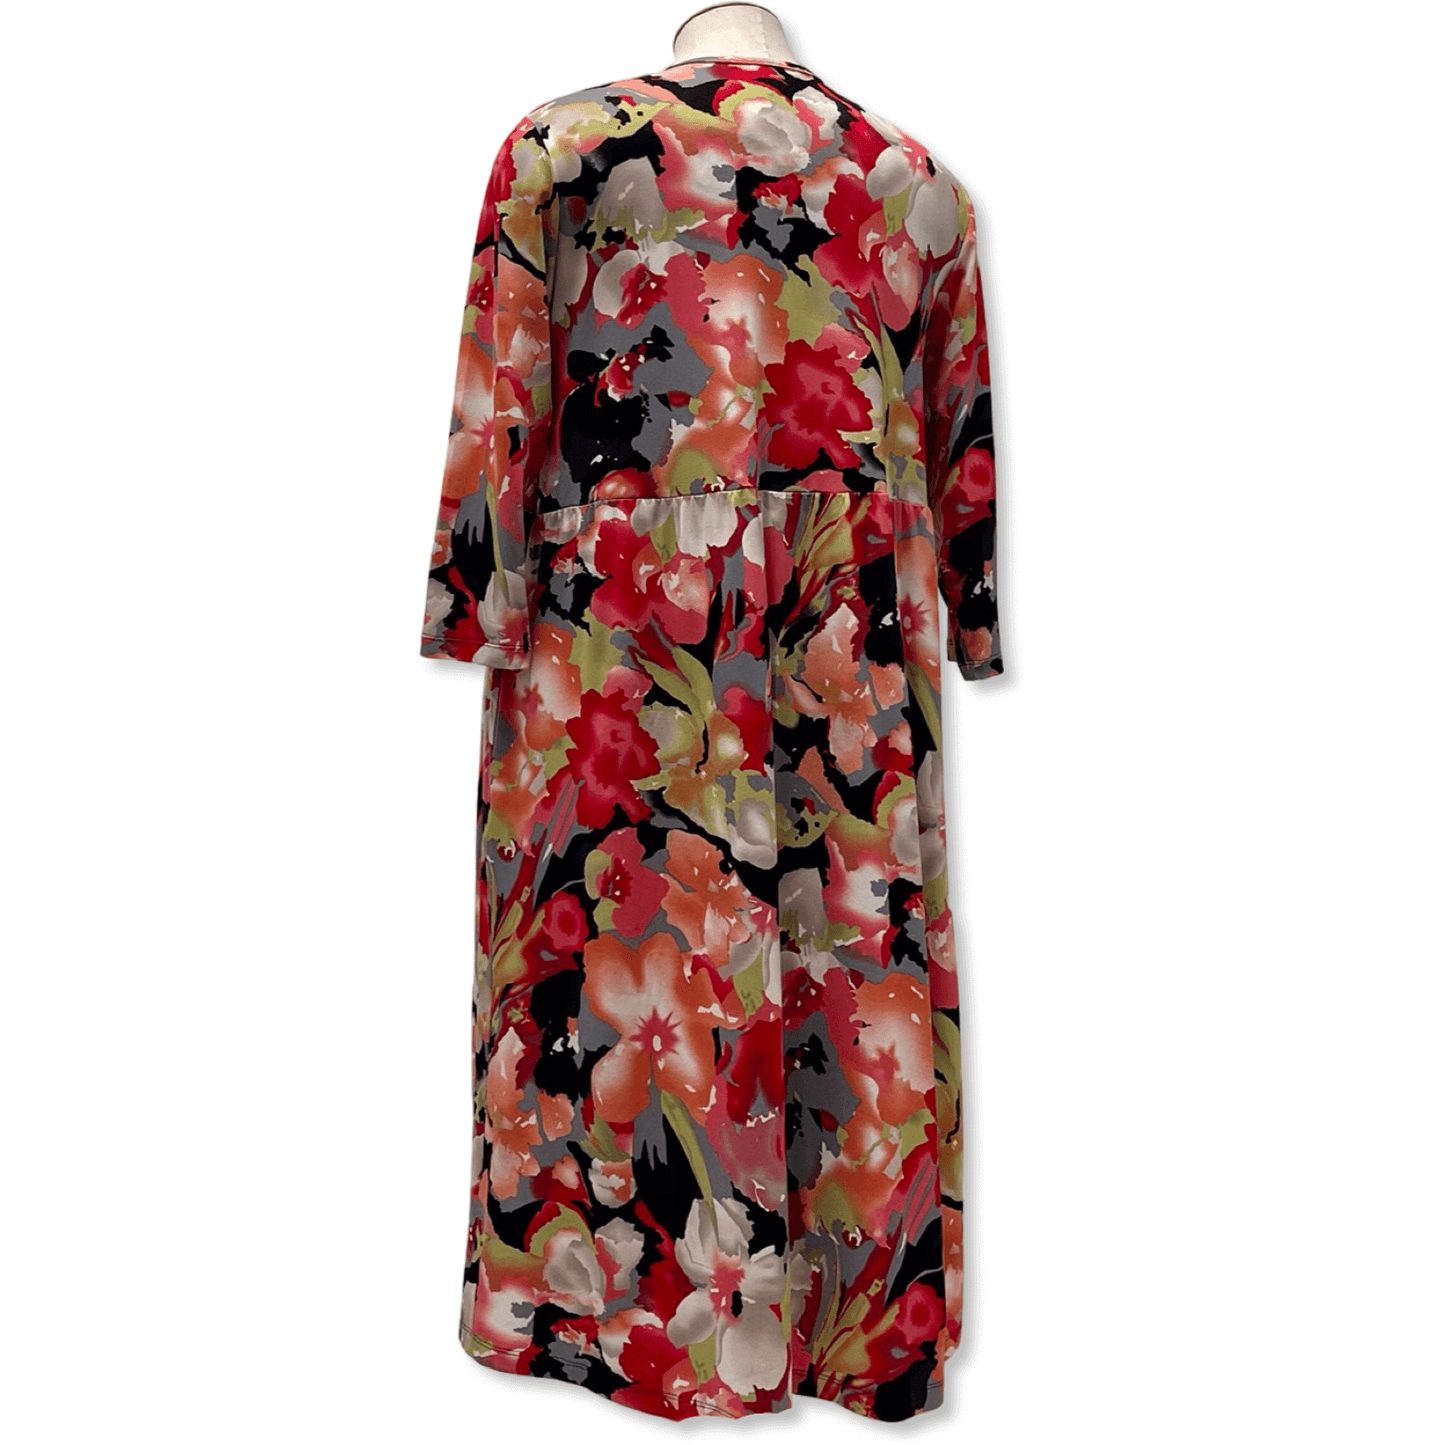 Bloom Clothing NZ,ALL DAY CUDDLES DRESS -Multi Floral,$90.00,